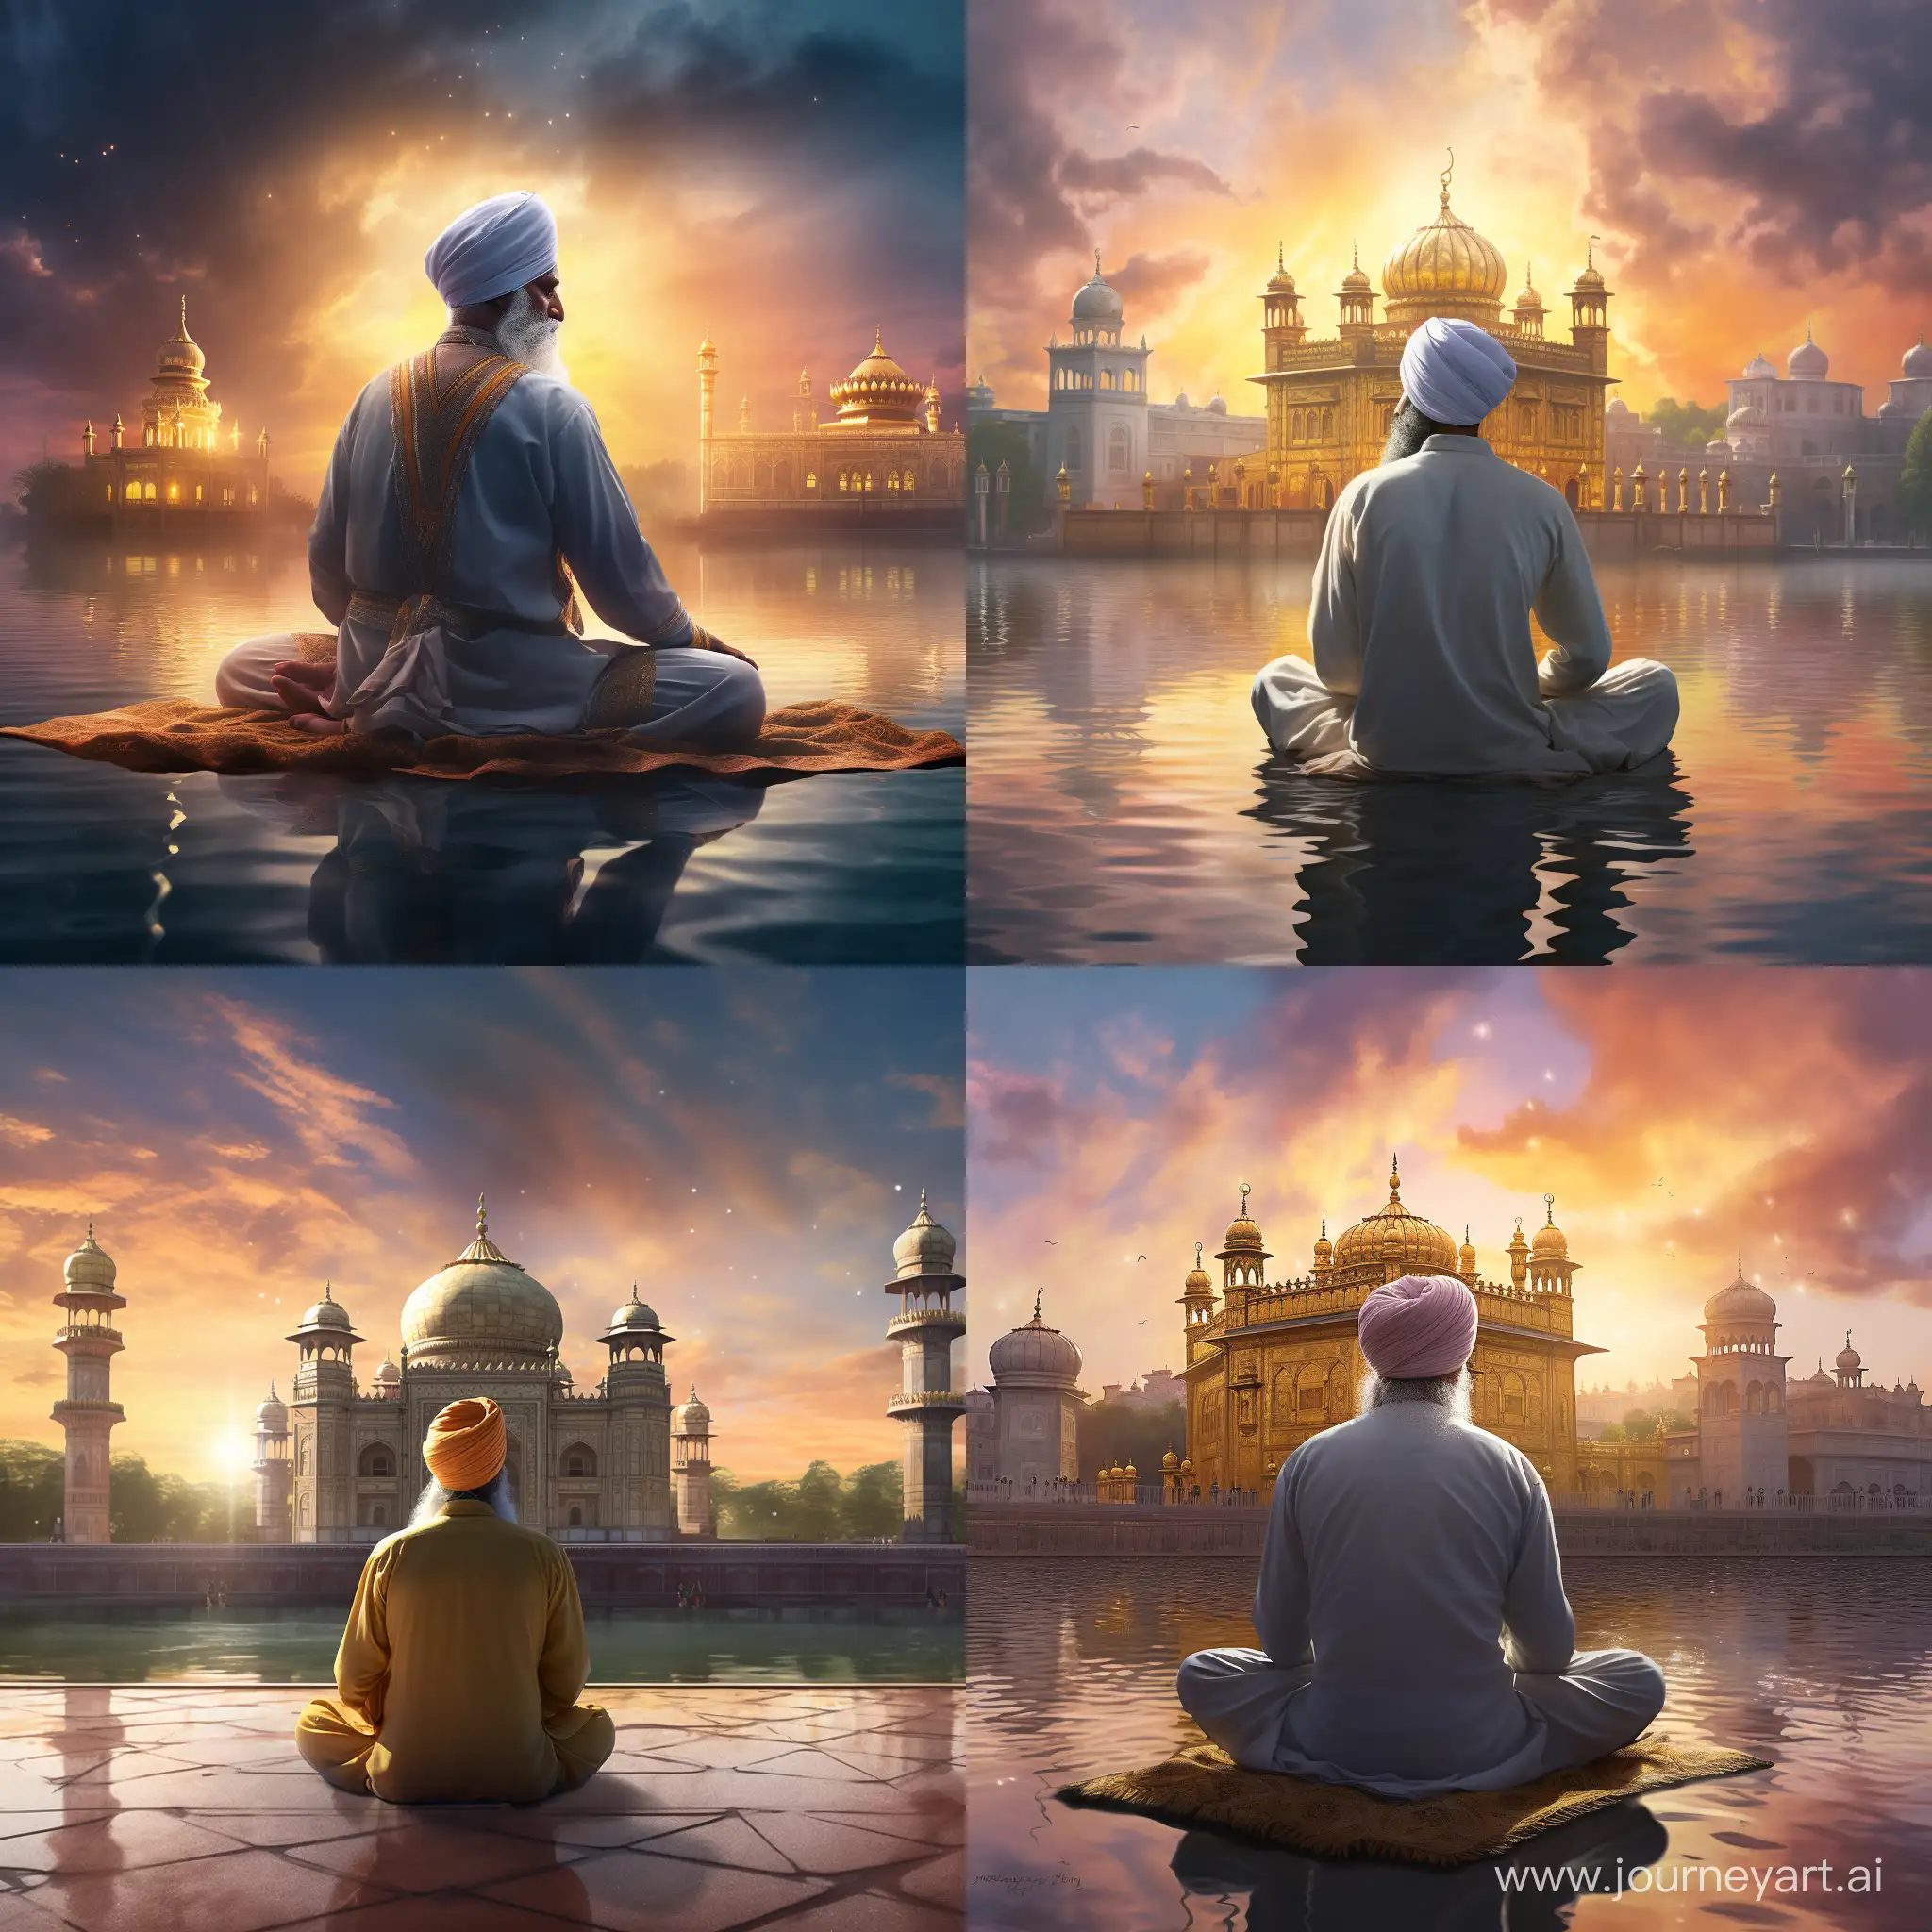 Serene scene: Sikh man in deep prayer, seated on the Golden Temple's floor, enveloped by the ethereal beauty of golden clouds rendered in hyper-realistic photorealism—ar 9:16—v 6